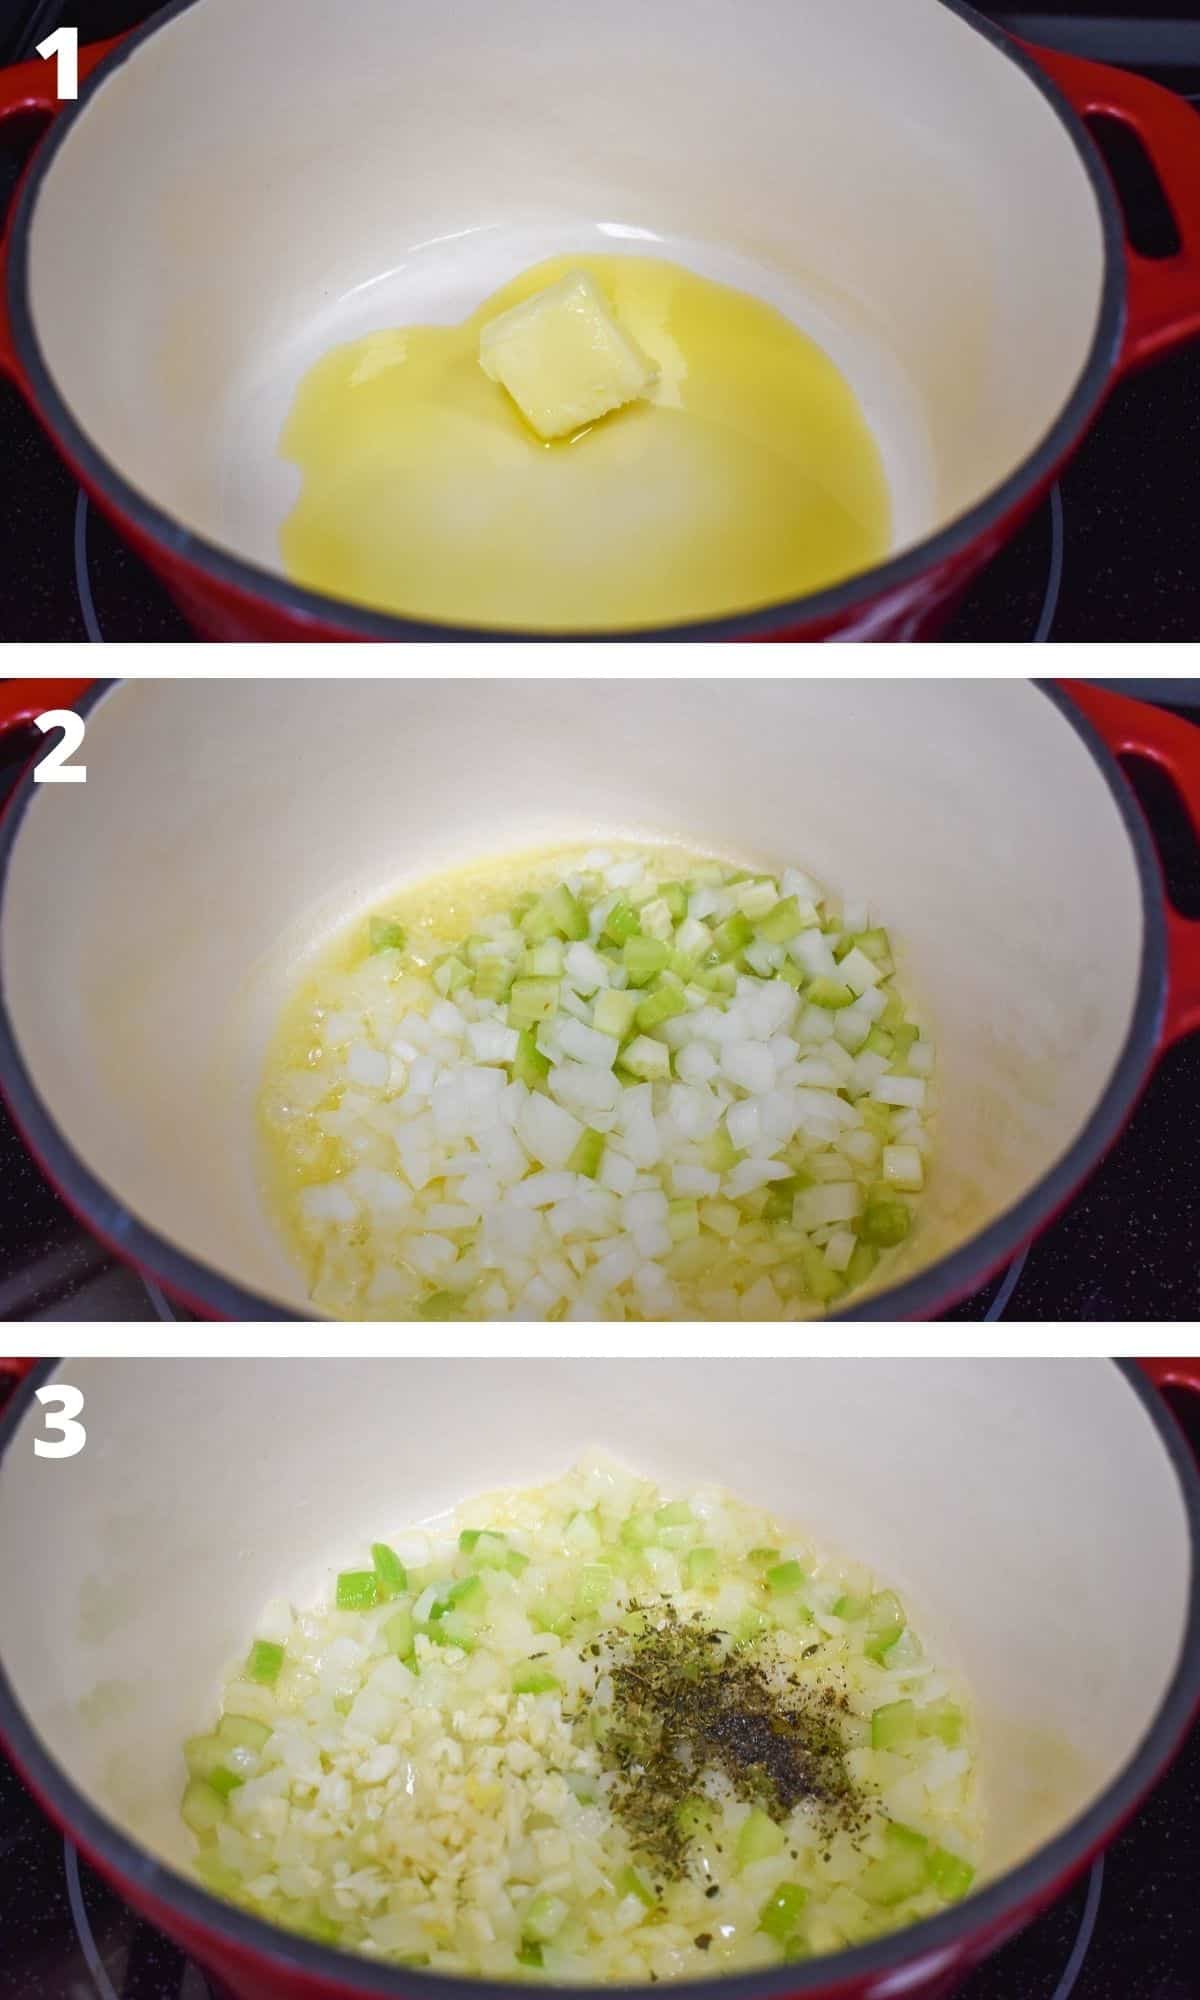 Three images showing the beginning steps of making the soup, from melting the butter through adding the garlic and spices.